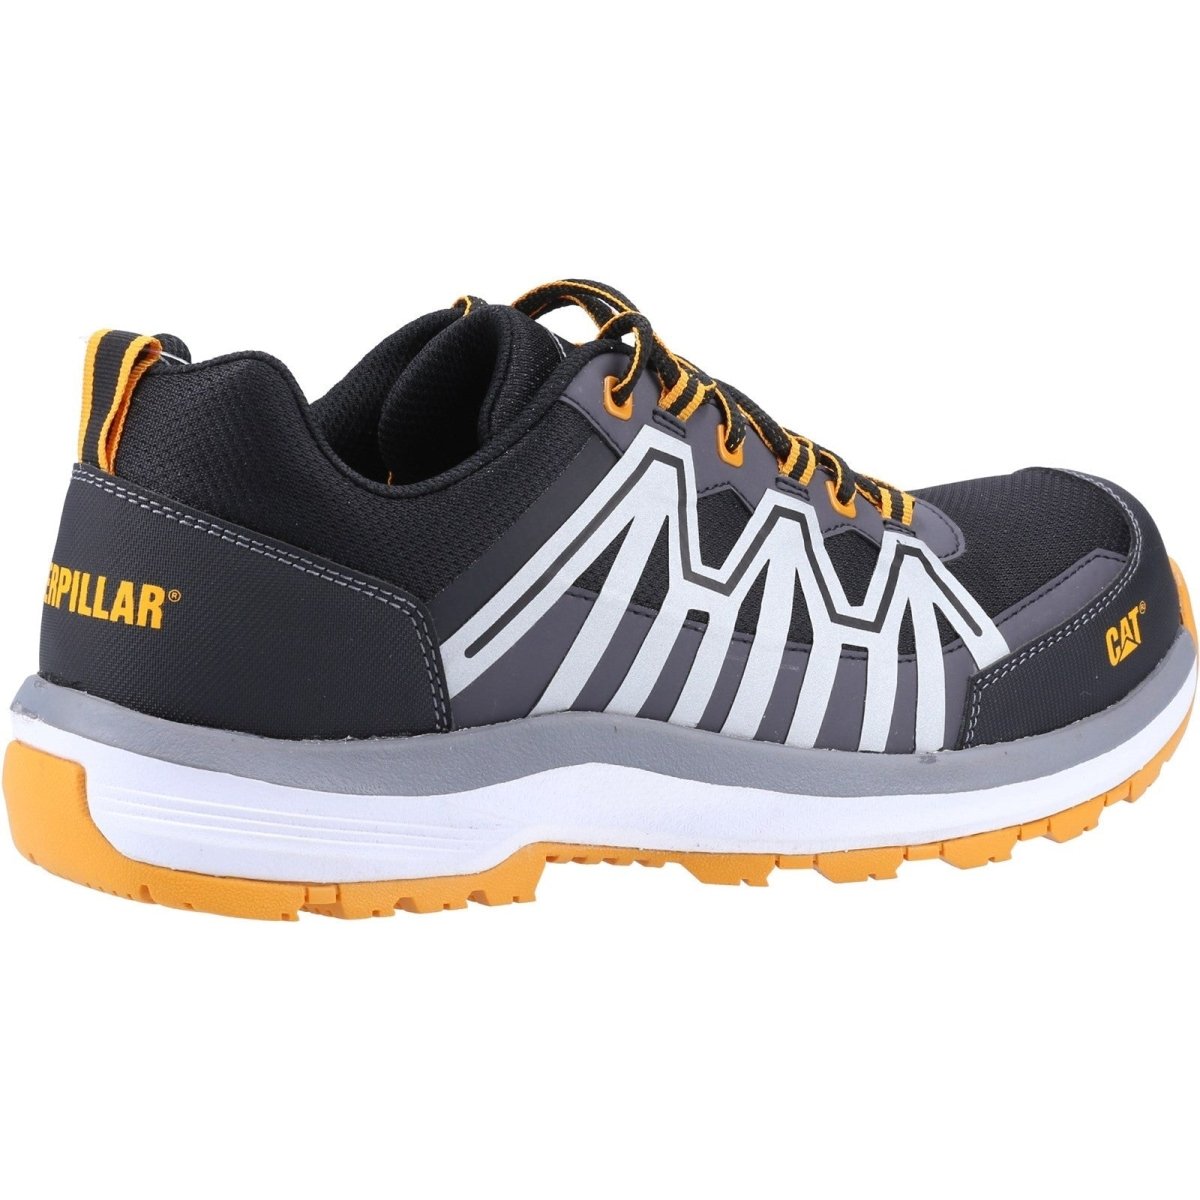 Caterpillar Charge S3 Composite Toe Mens Safety Trainers - Shoe Store Direct